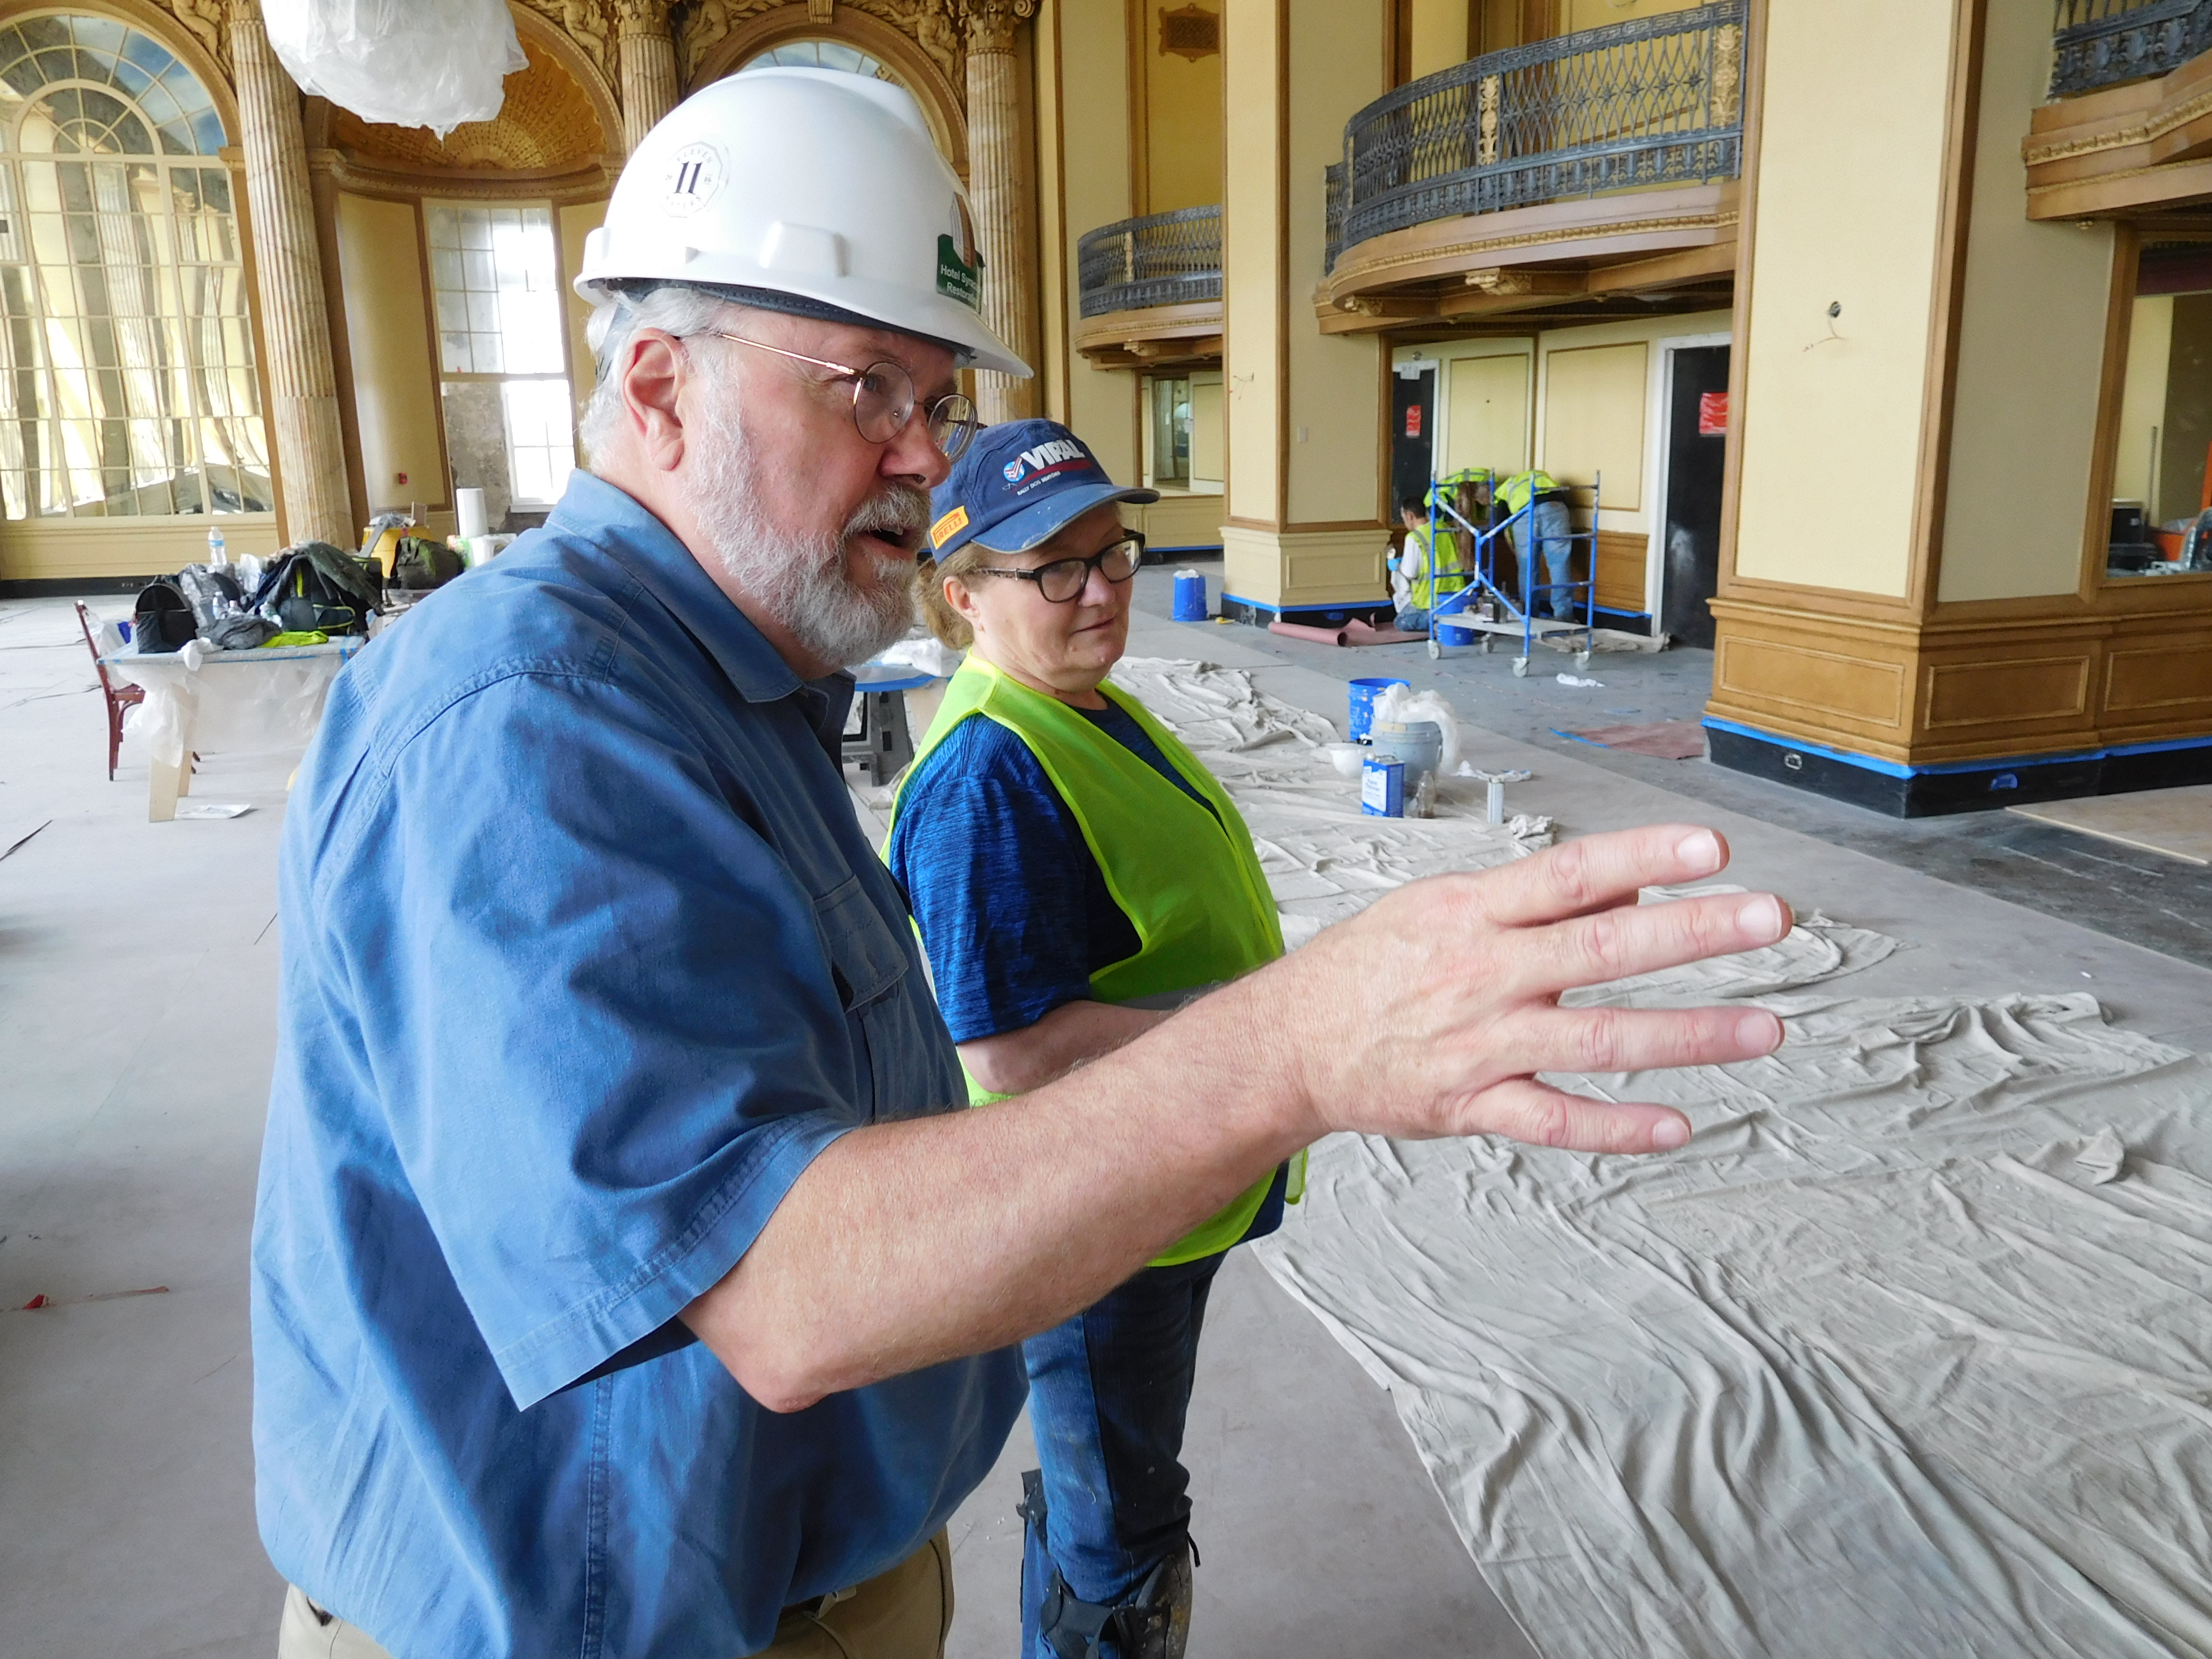 Riley working with a contractor in the Grand Ballroom of the Hotel Syracuse